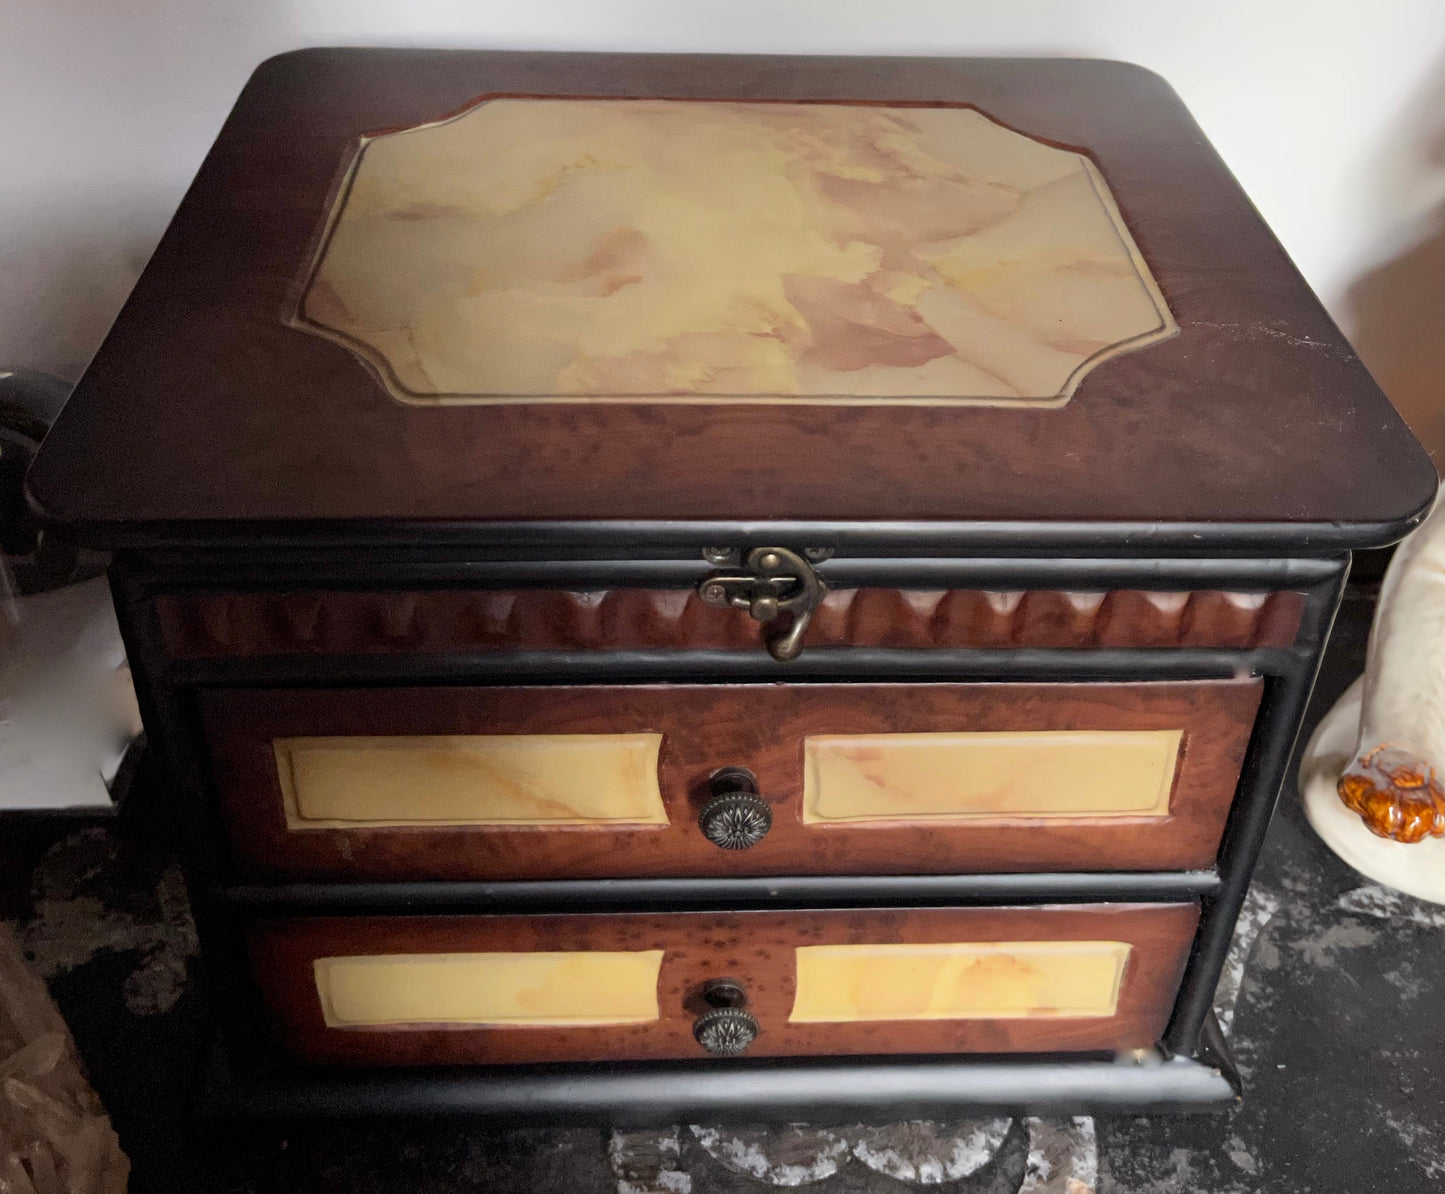 Oddities Chest, Vintage Chest, Tarot Card Chest, Home Decor